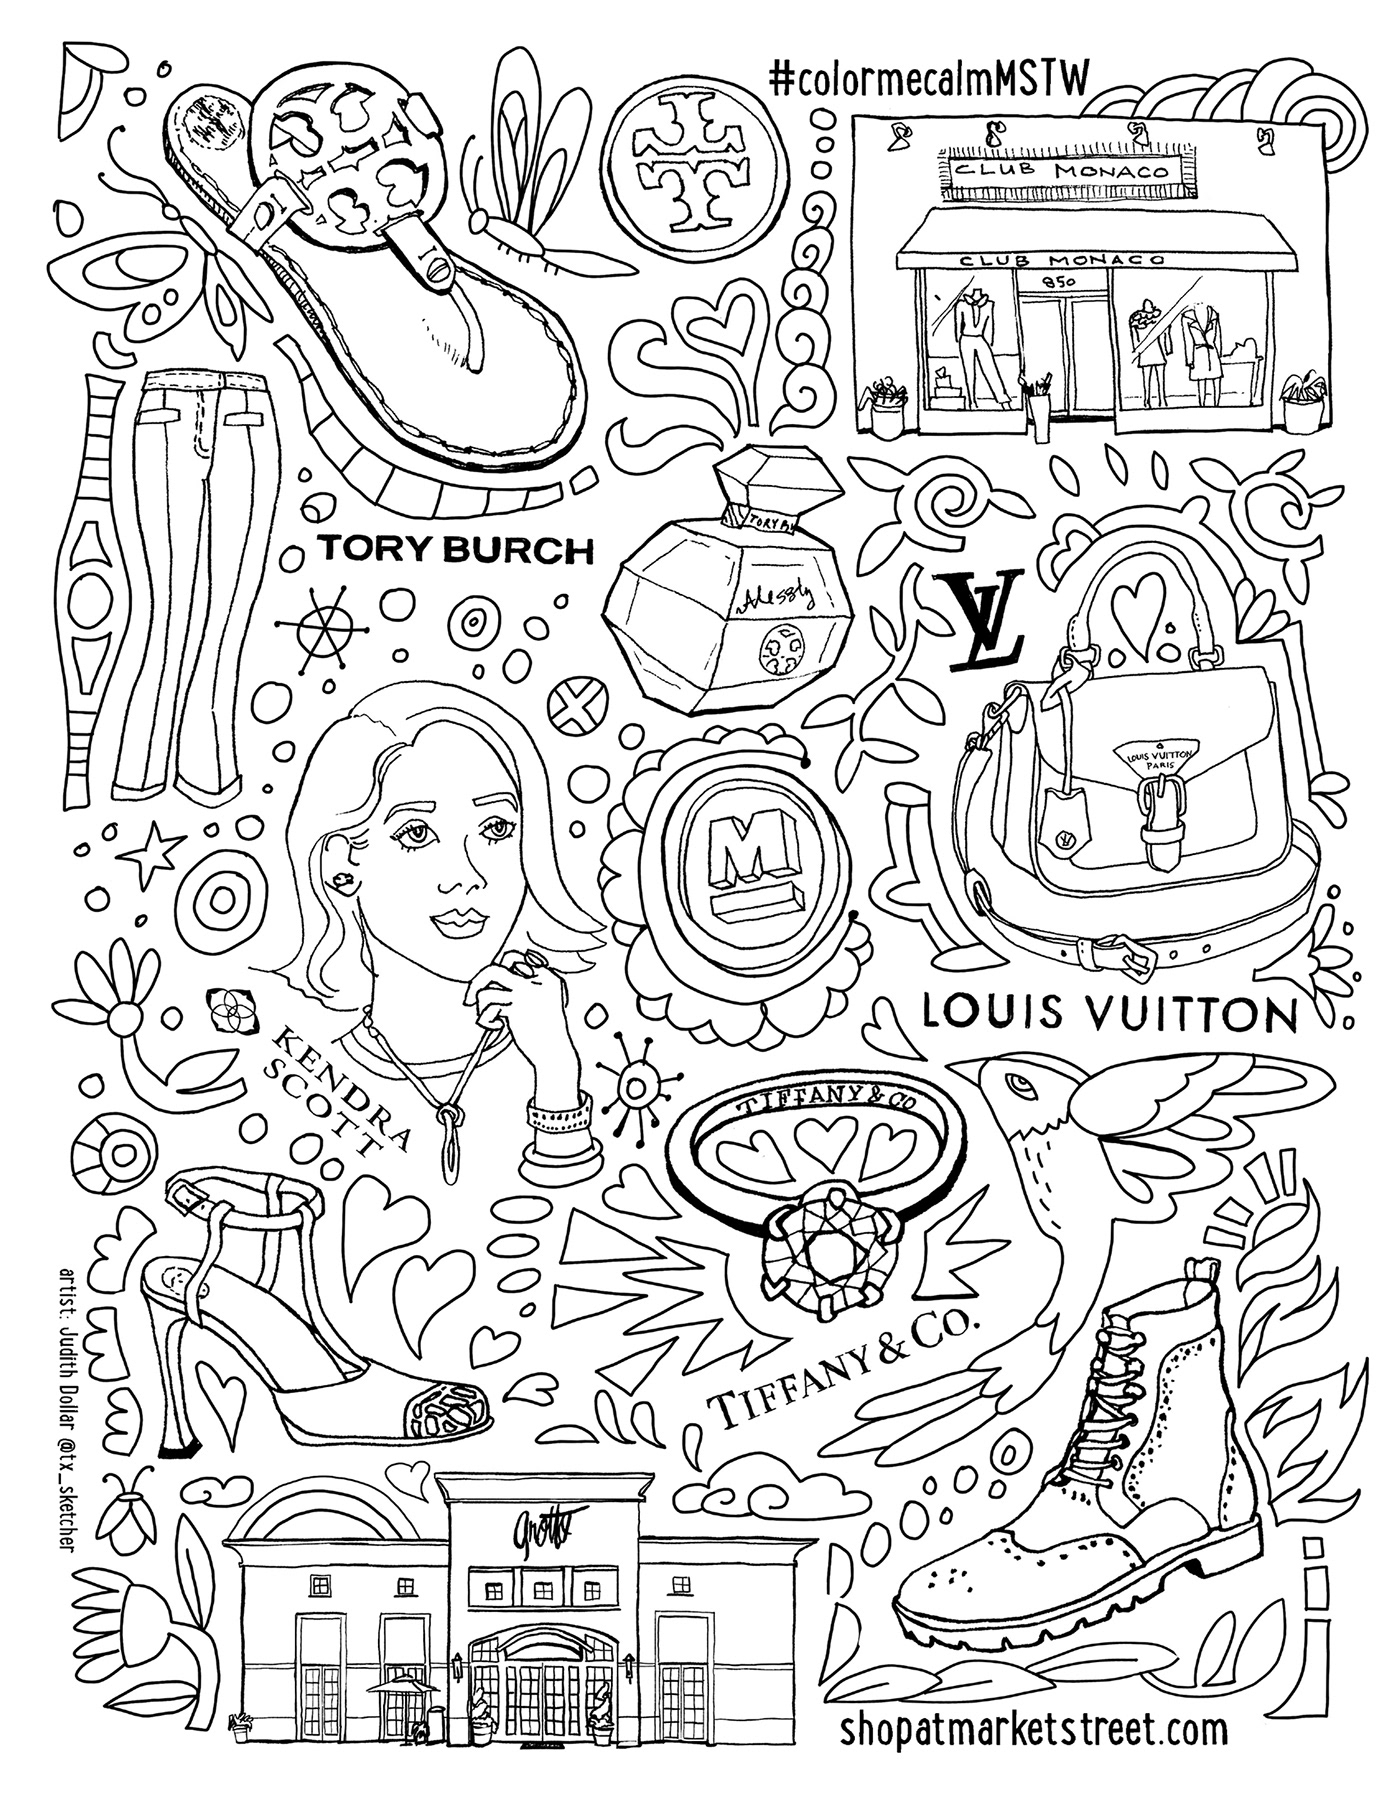 adult coloring page coloring book coloring page doodle art fashion illustration line art marketing   pattern